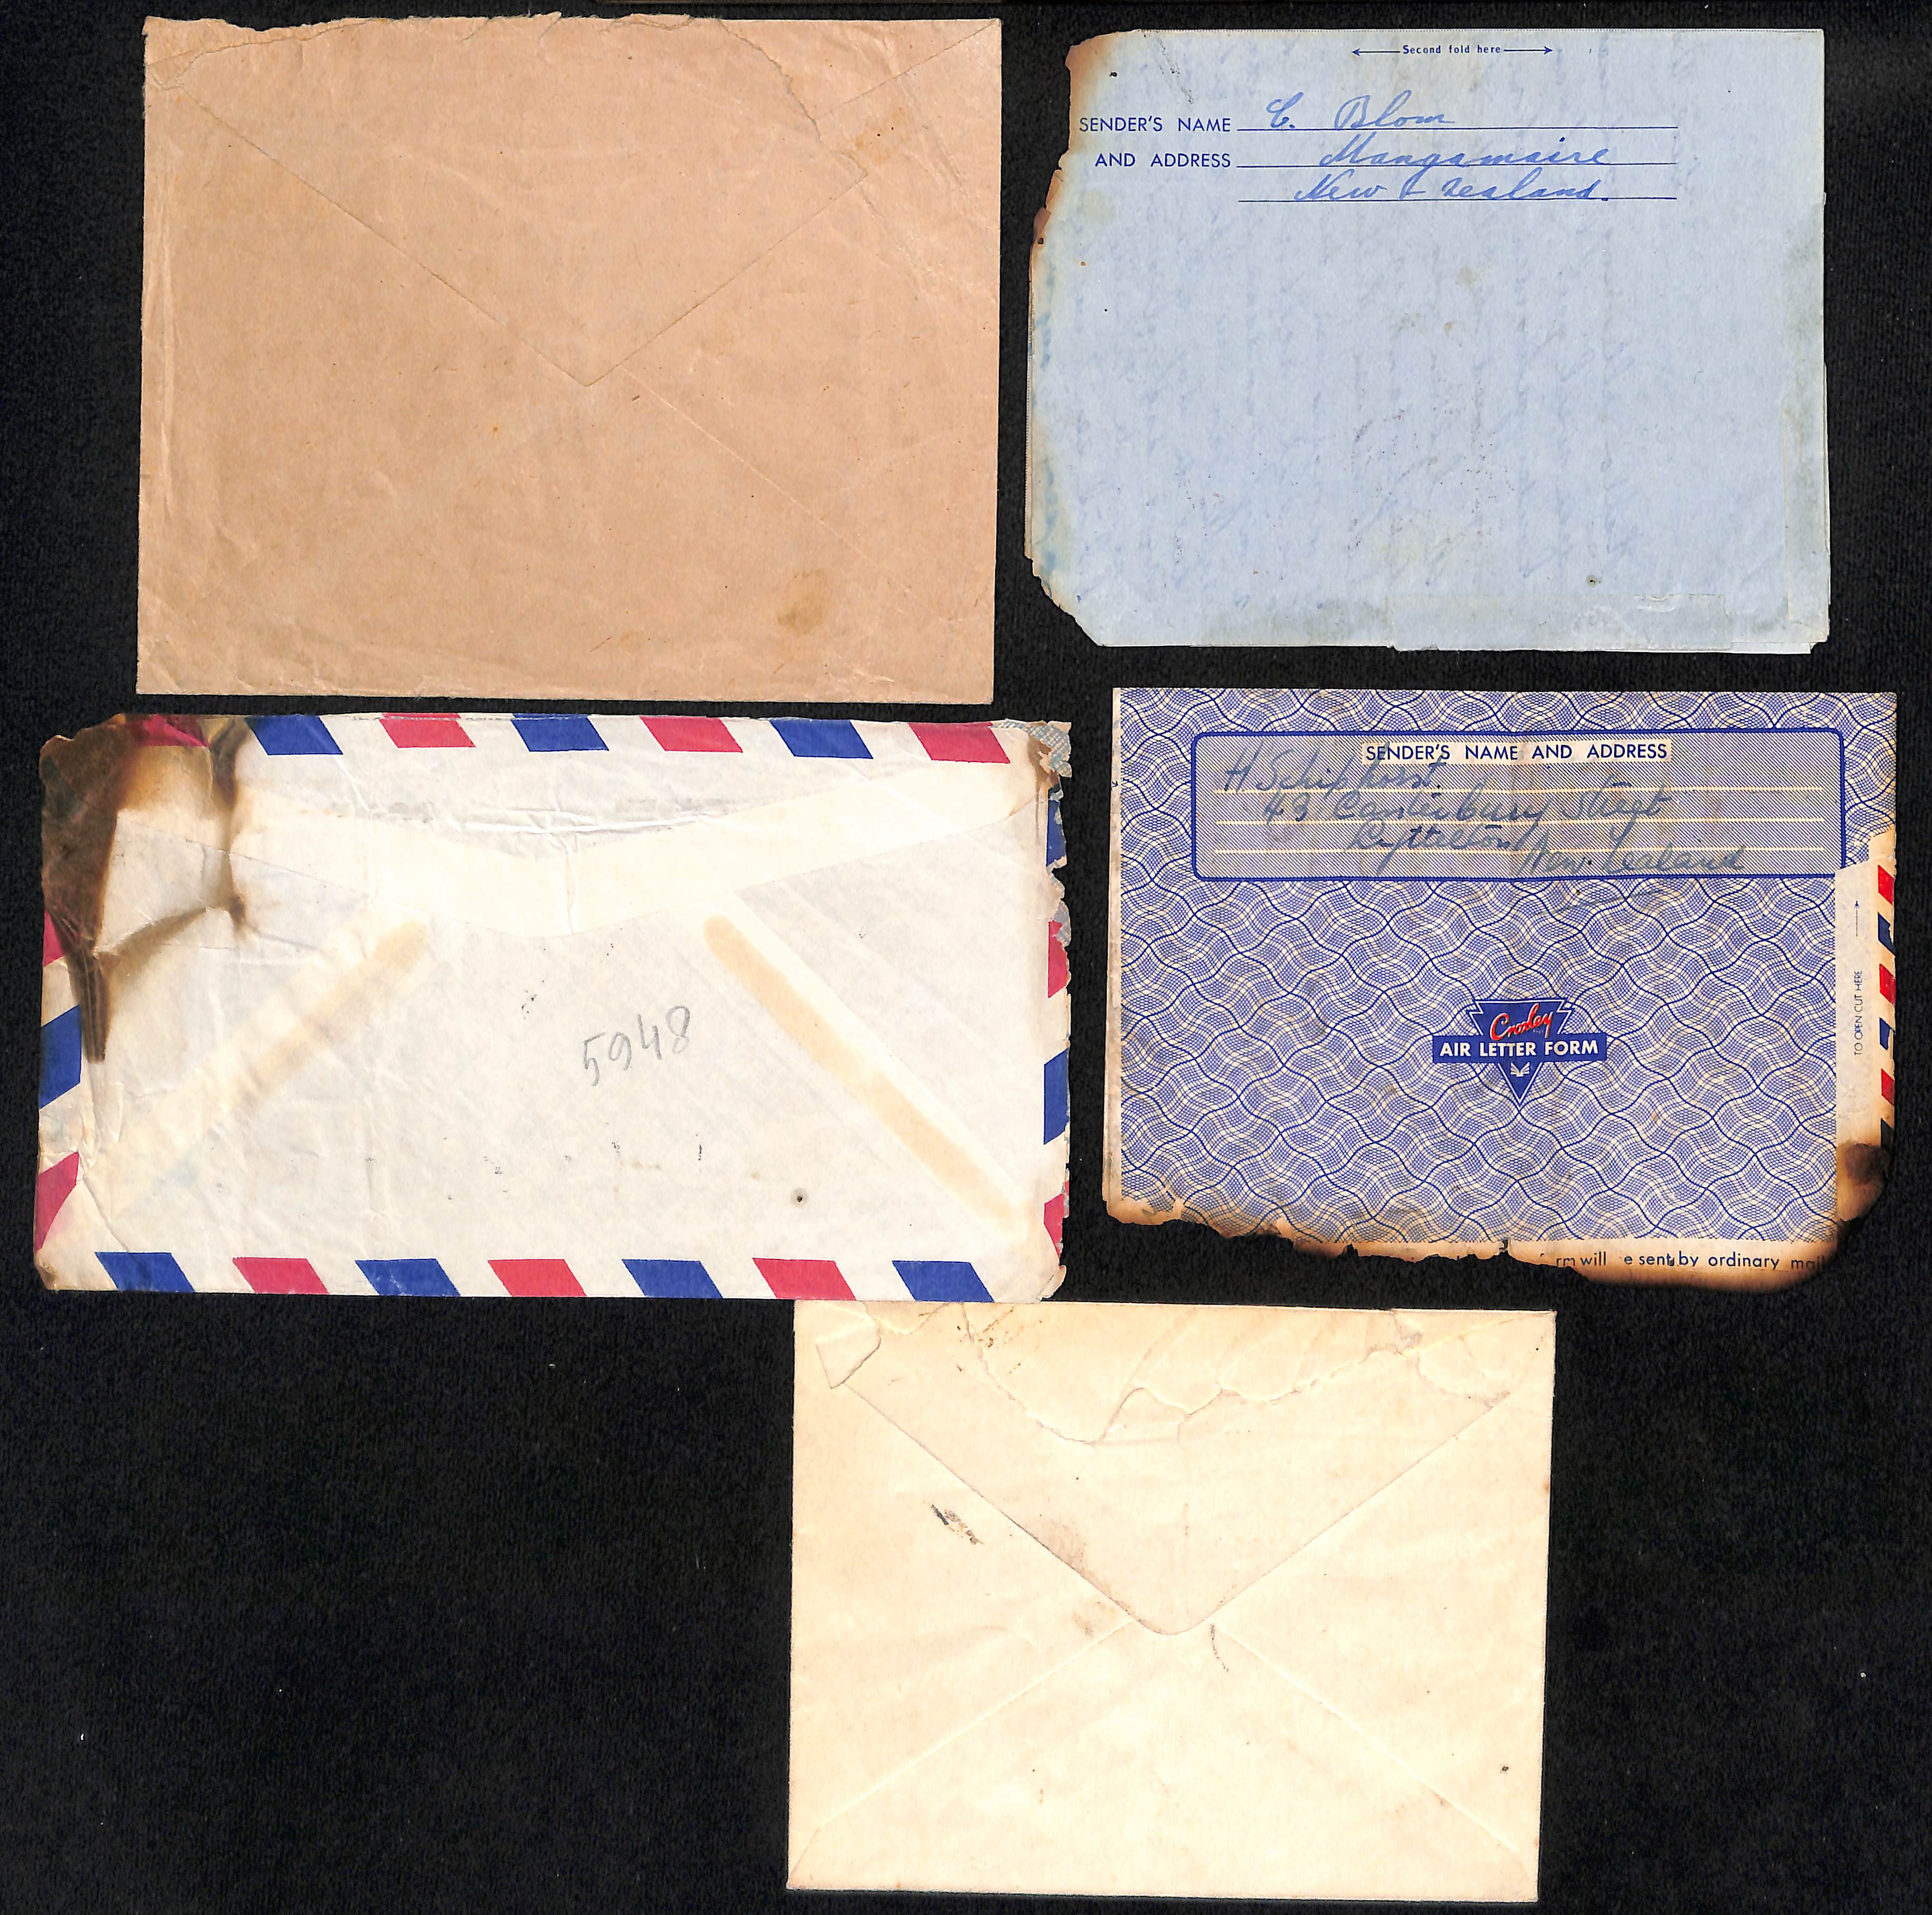 Netherlands From New Zealand. 1954 (Mar. 9) Air Letters franked 8d (2) and a cover franked 1/6, - Image 2 of 2